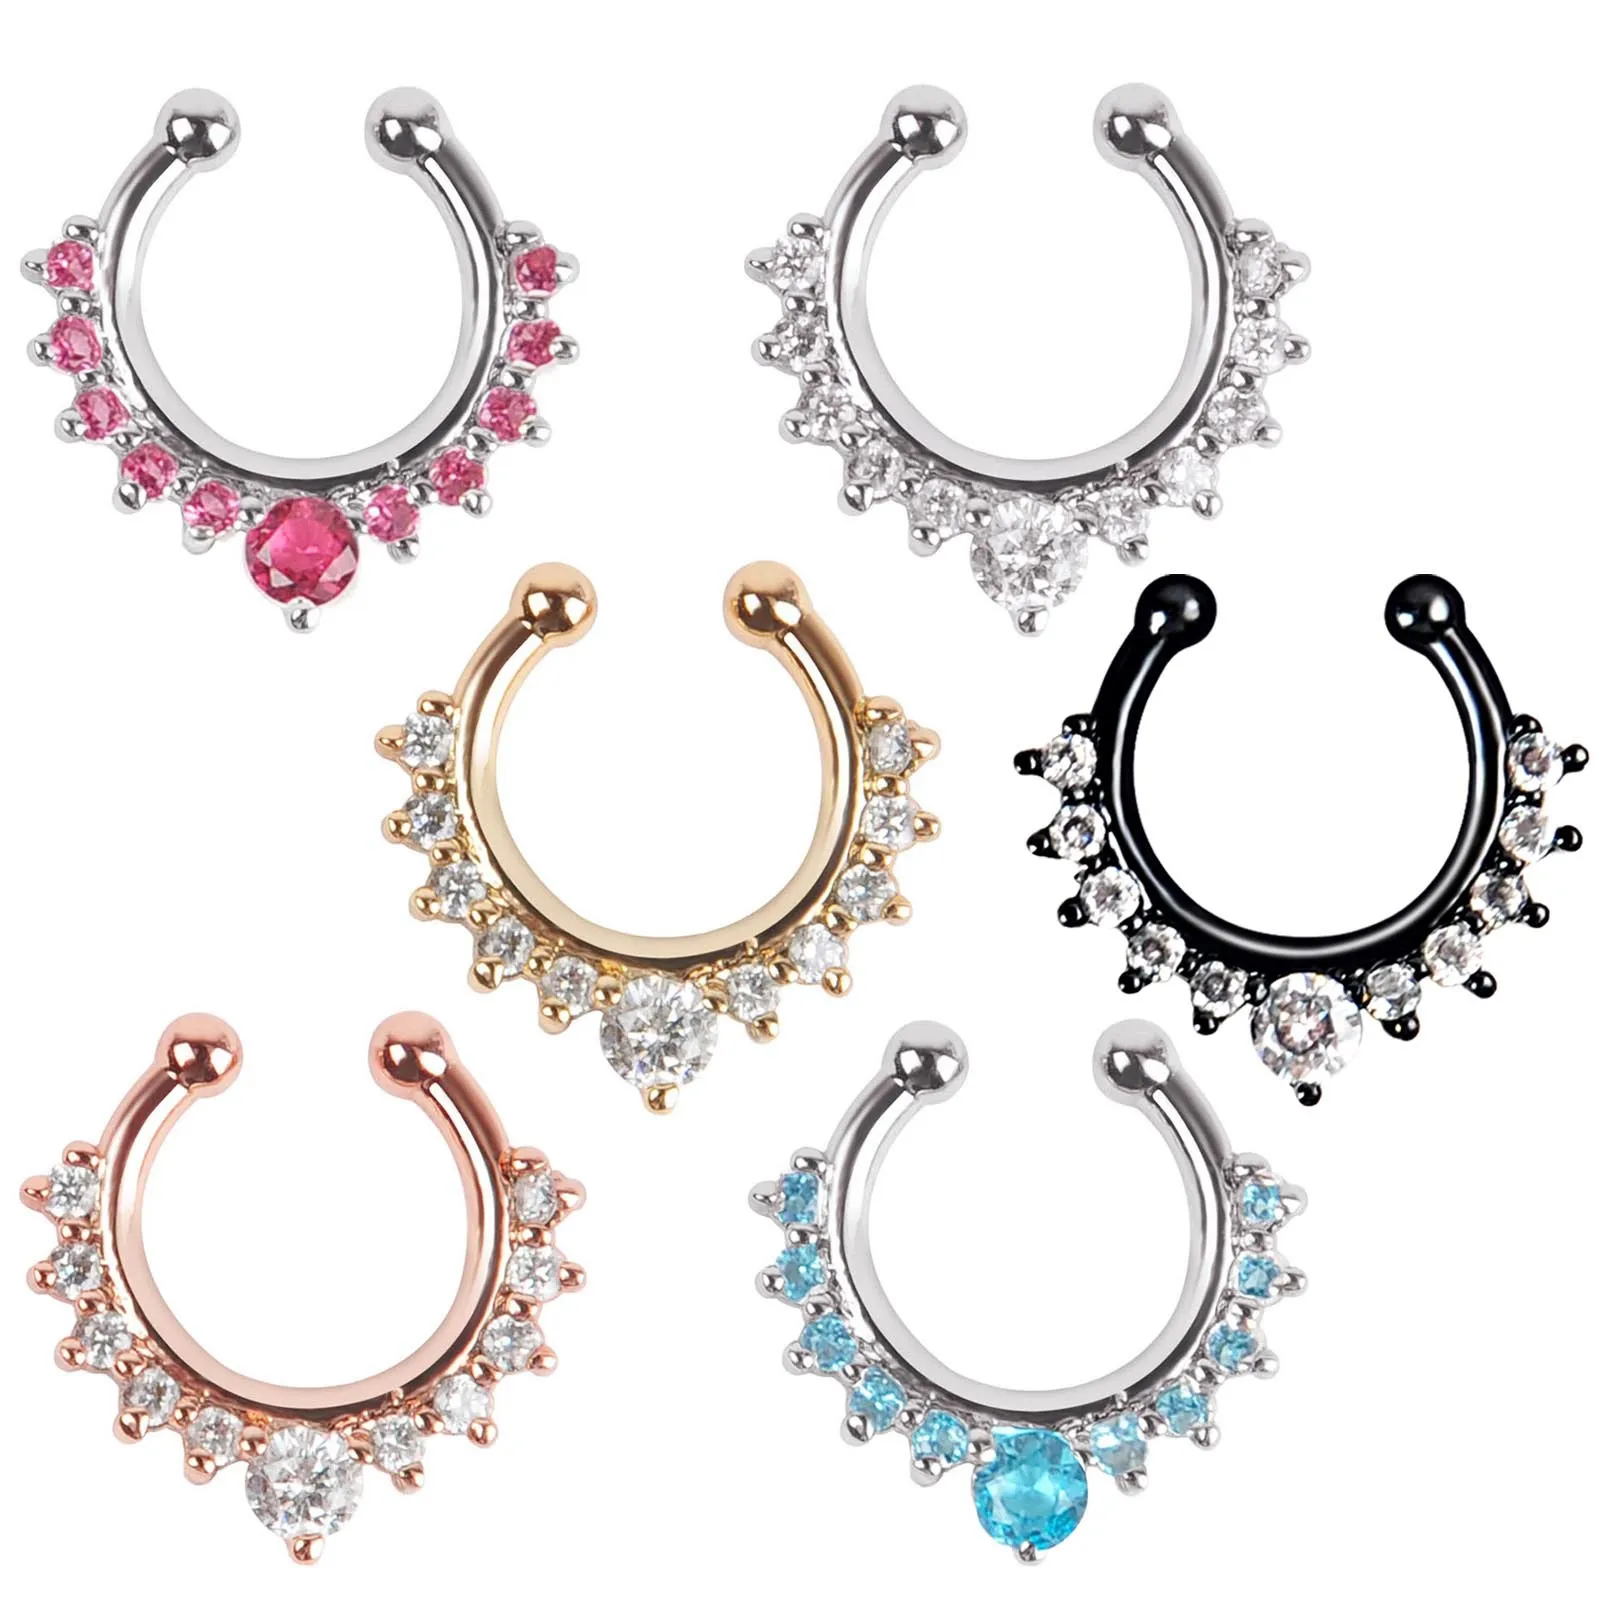 

Alloy Septum Clicker Hoop Ring Nose Labret Ear Tragus Cartilage Daith Helix Earring Stud Body Piercing Jewelry